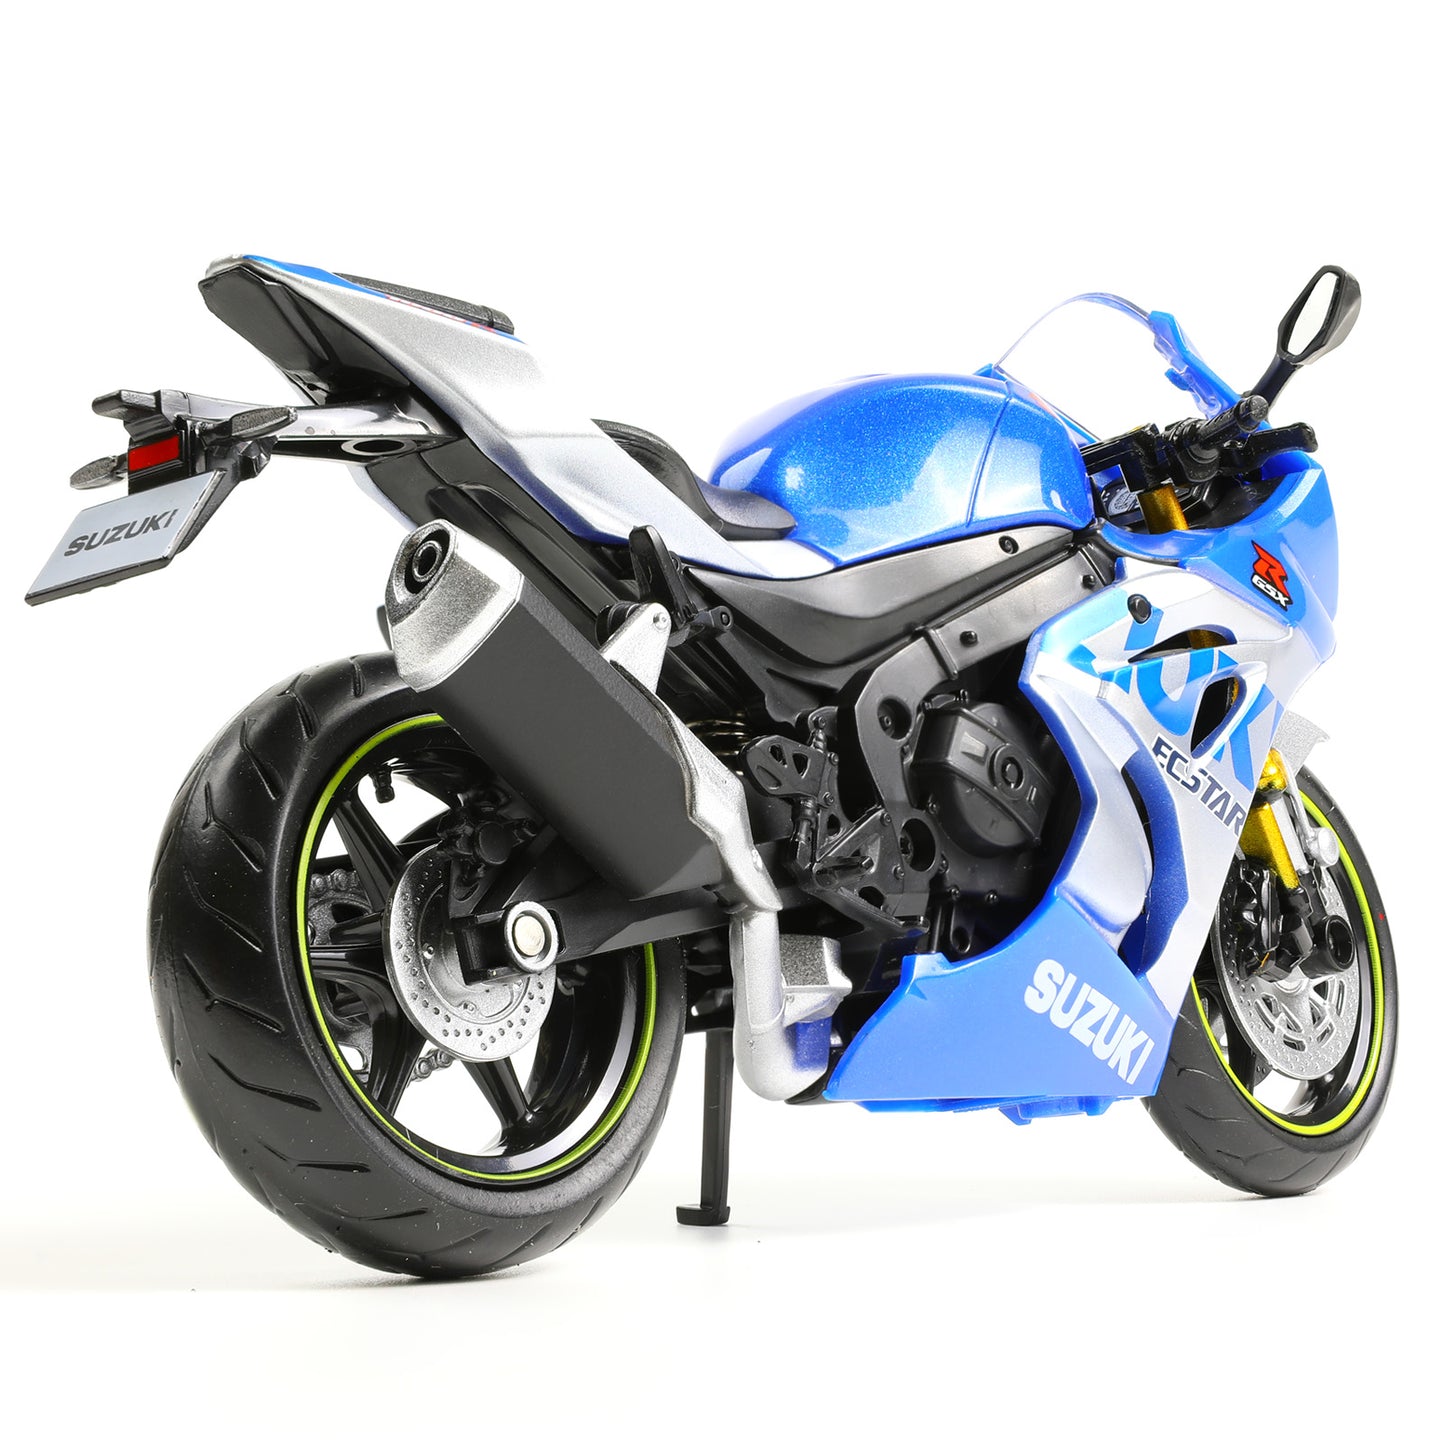 1:12 Scale DieCast Motorcycle Model for SUZUKI GSX R1000R, Realistic Motorcycle Metal Model, Kids Moto Toy or Collection,MAKEDA Pre-Built Toys Gift